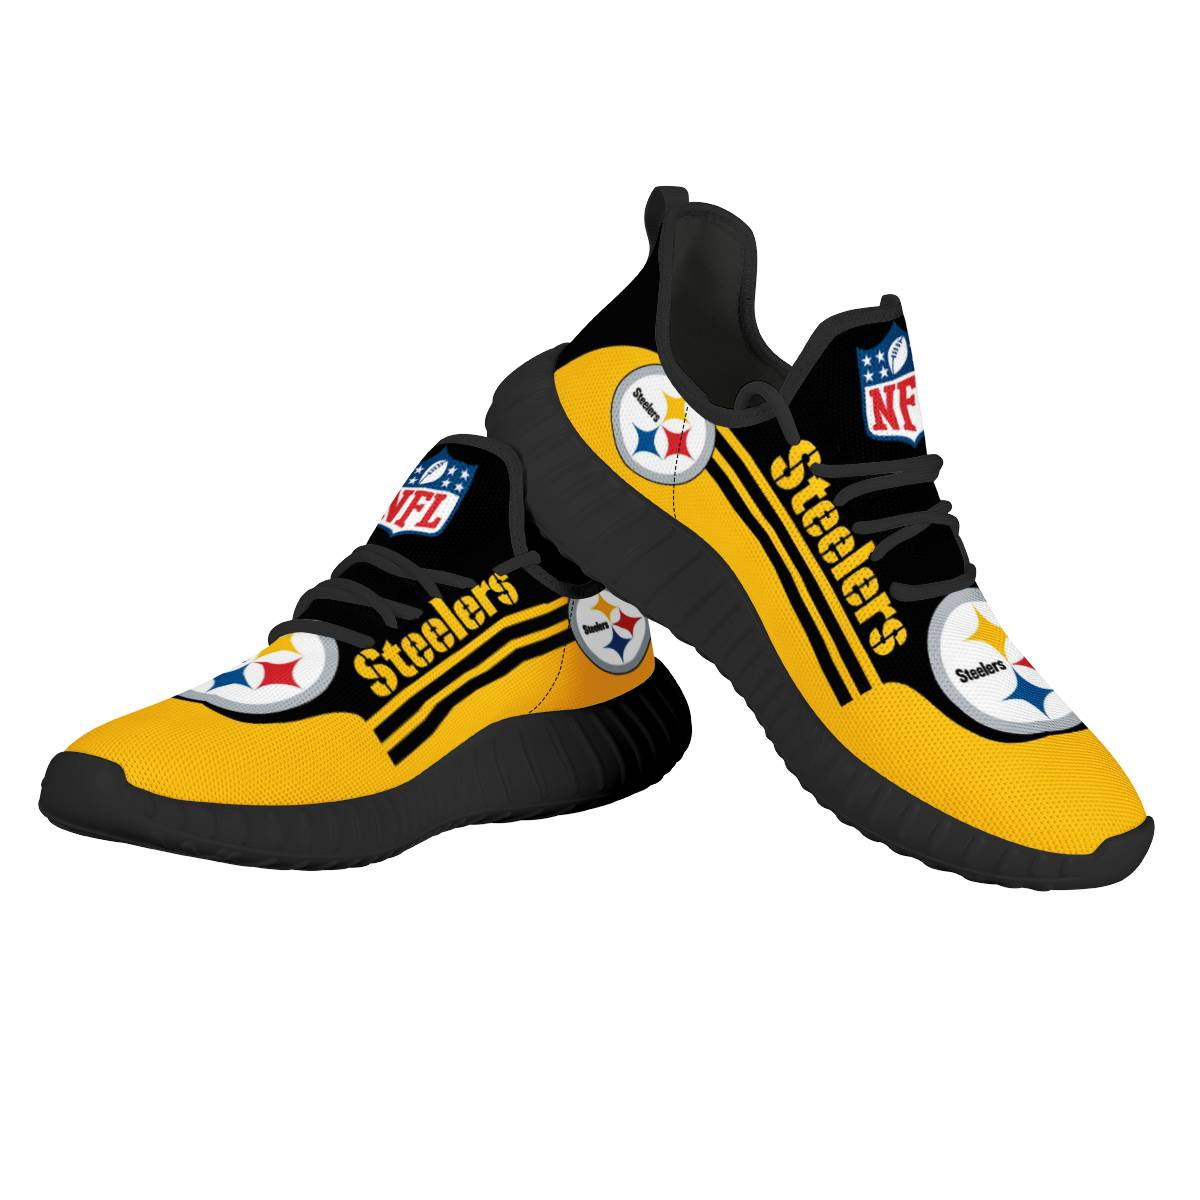 Women's NFL Pittsburgh Steelers Mesh Knit Sneakers/Shoes 015